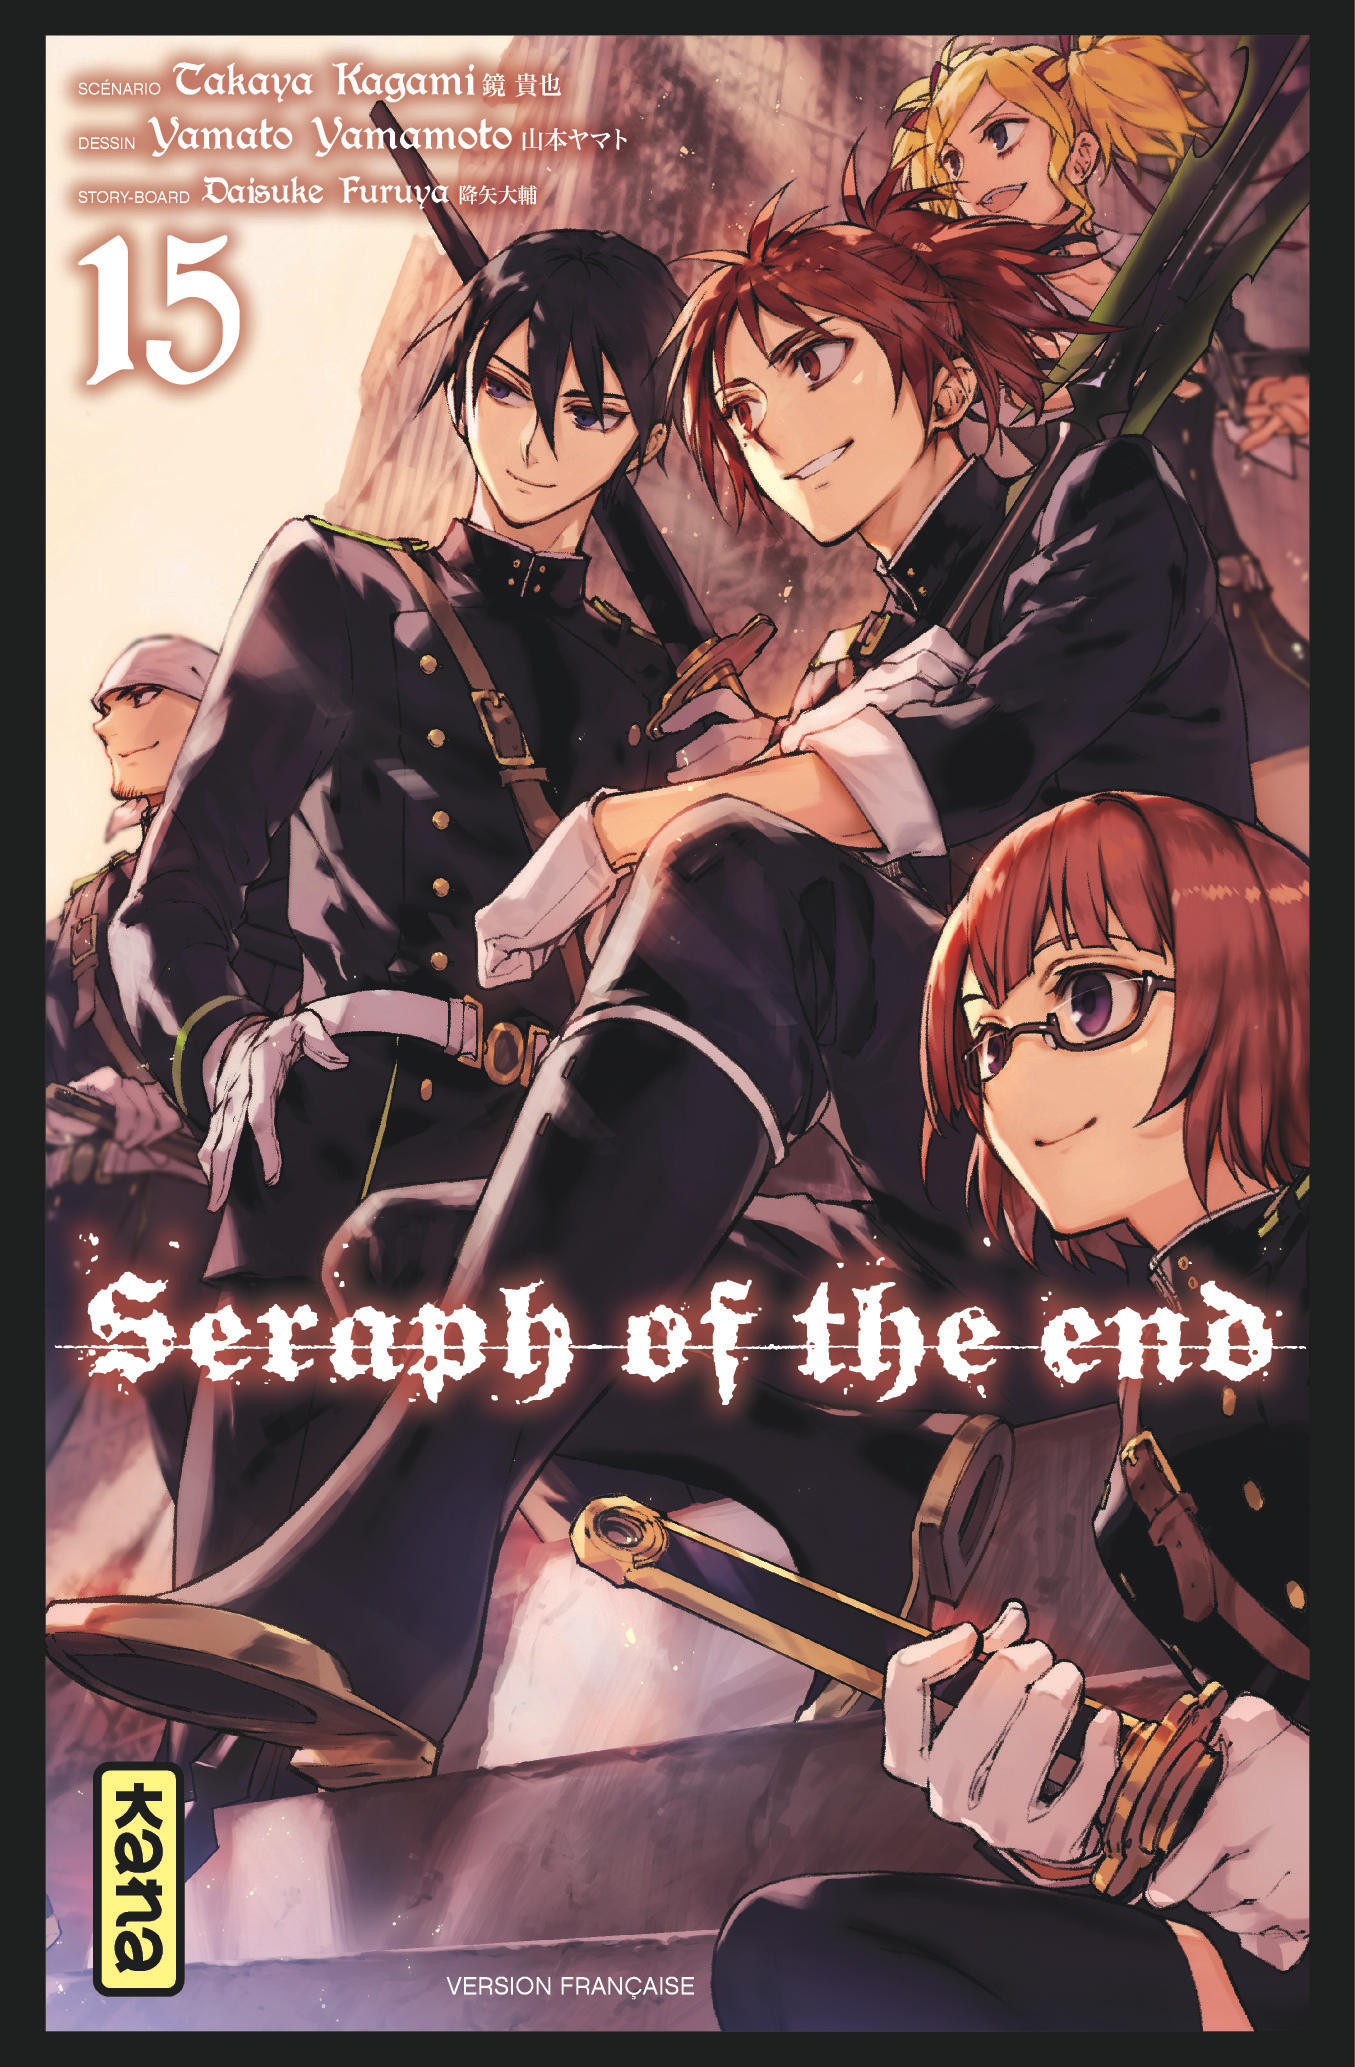 Seraph of the end – Tome 15 - couv